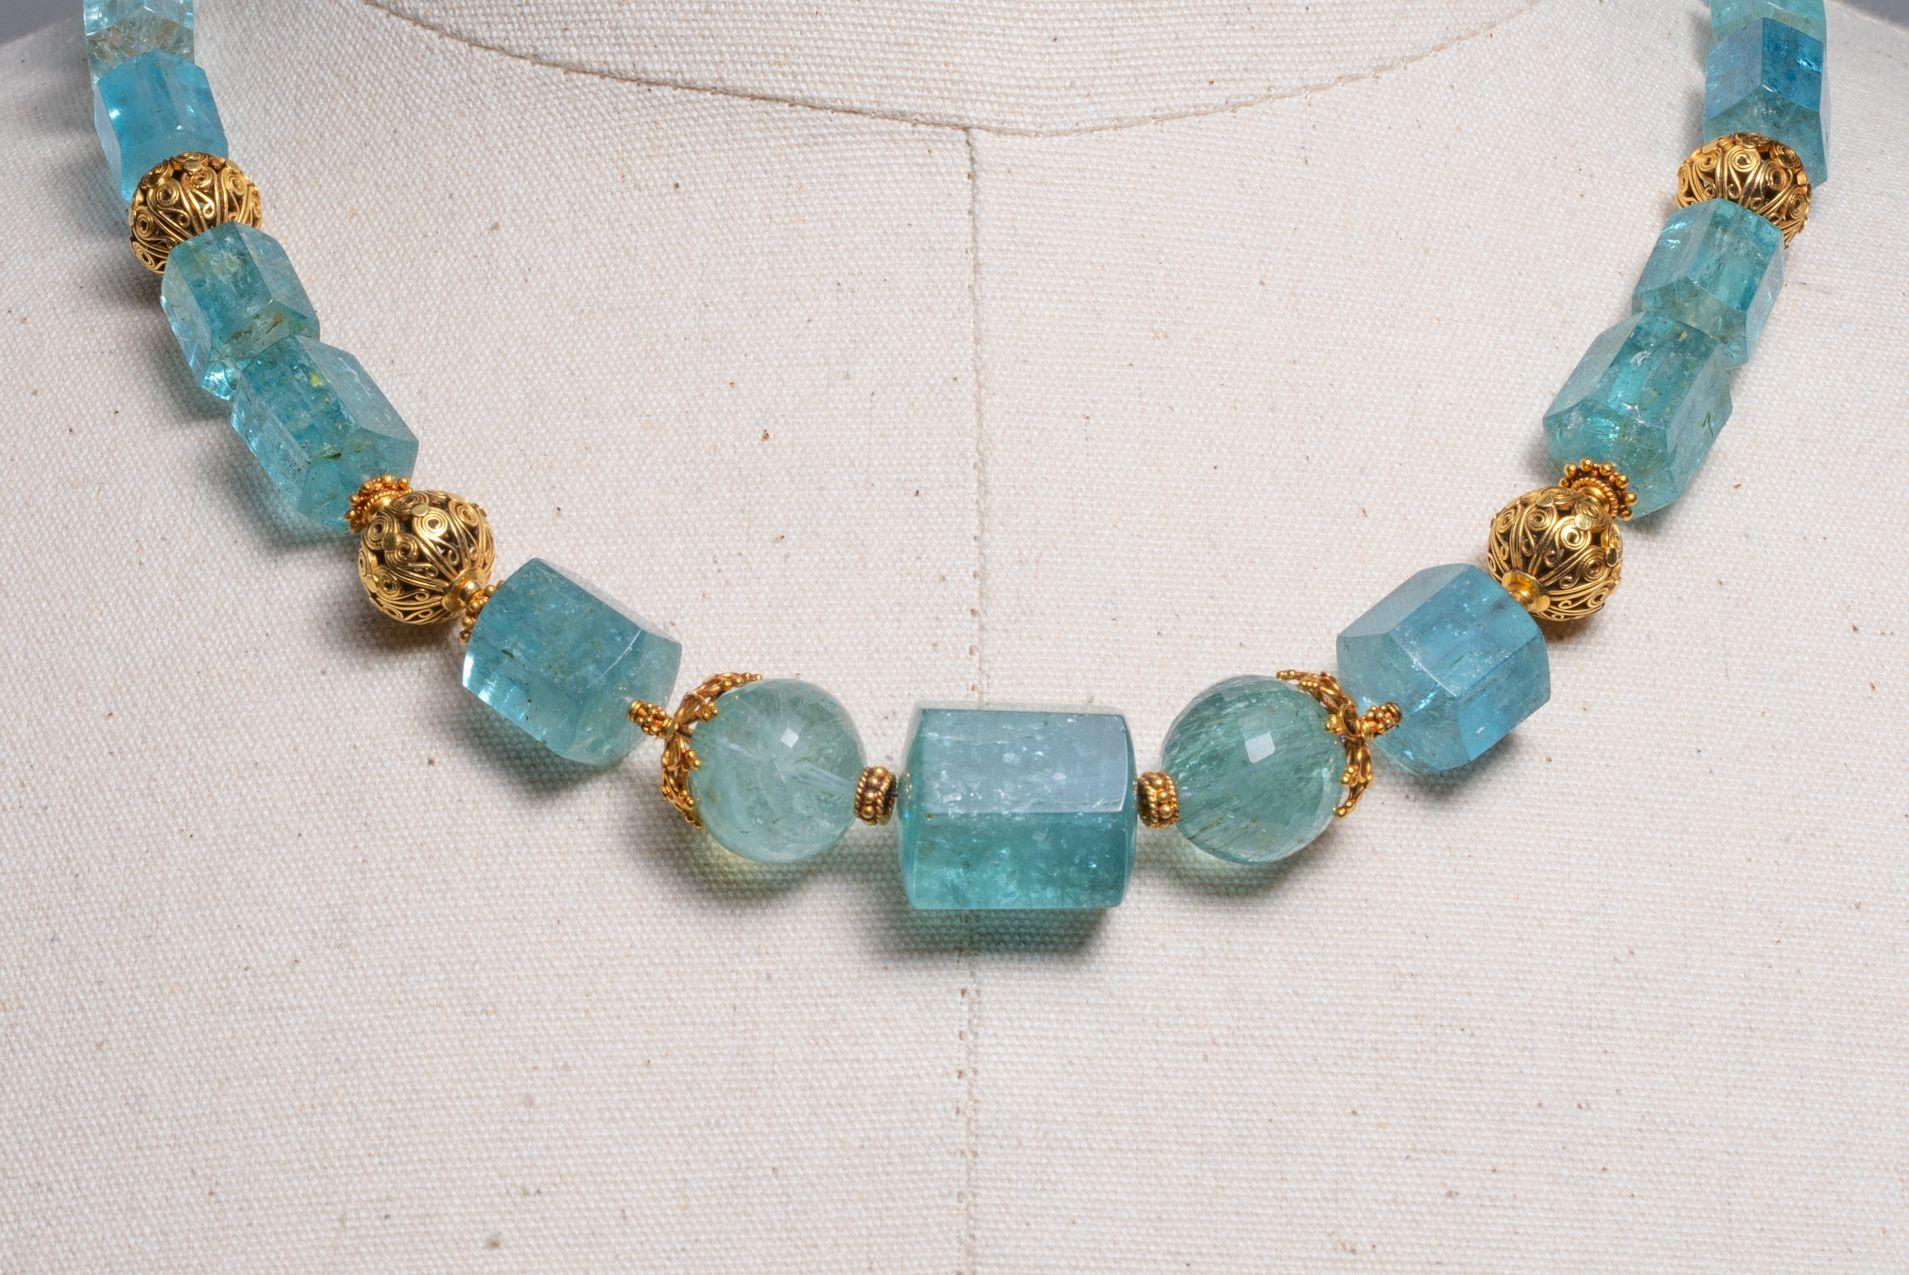 A stunning aquamarine beaded necklace with 18K gold.  The large aquamarines are a combination of beveled and faceted round beads of exceptional color and translucence.  The gold beads are all hand crafted with wire work and granulation in 18K gold. 